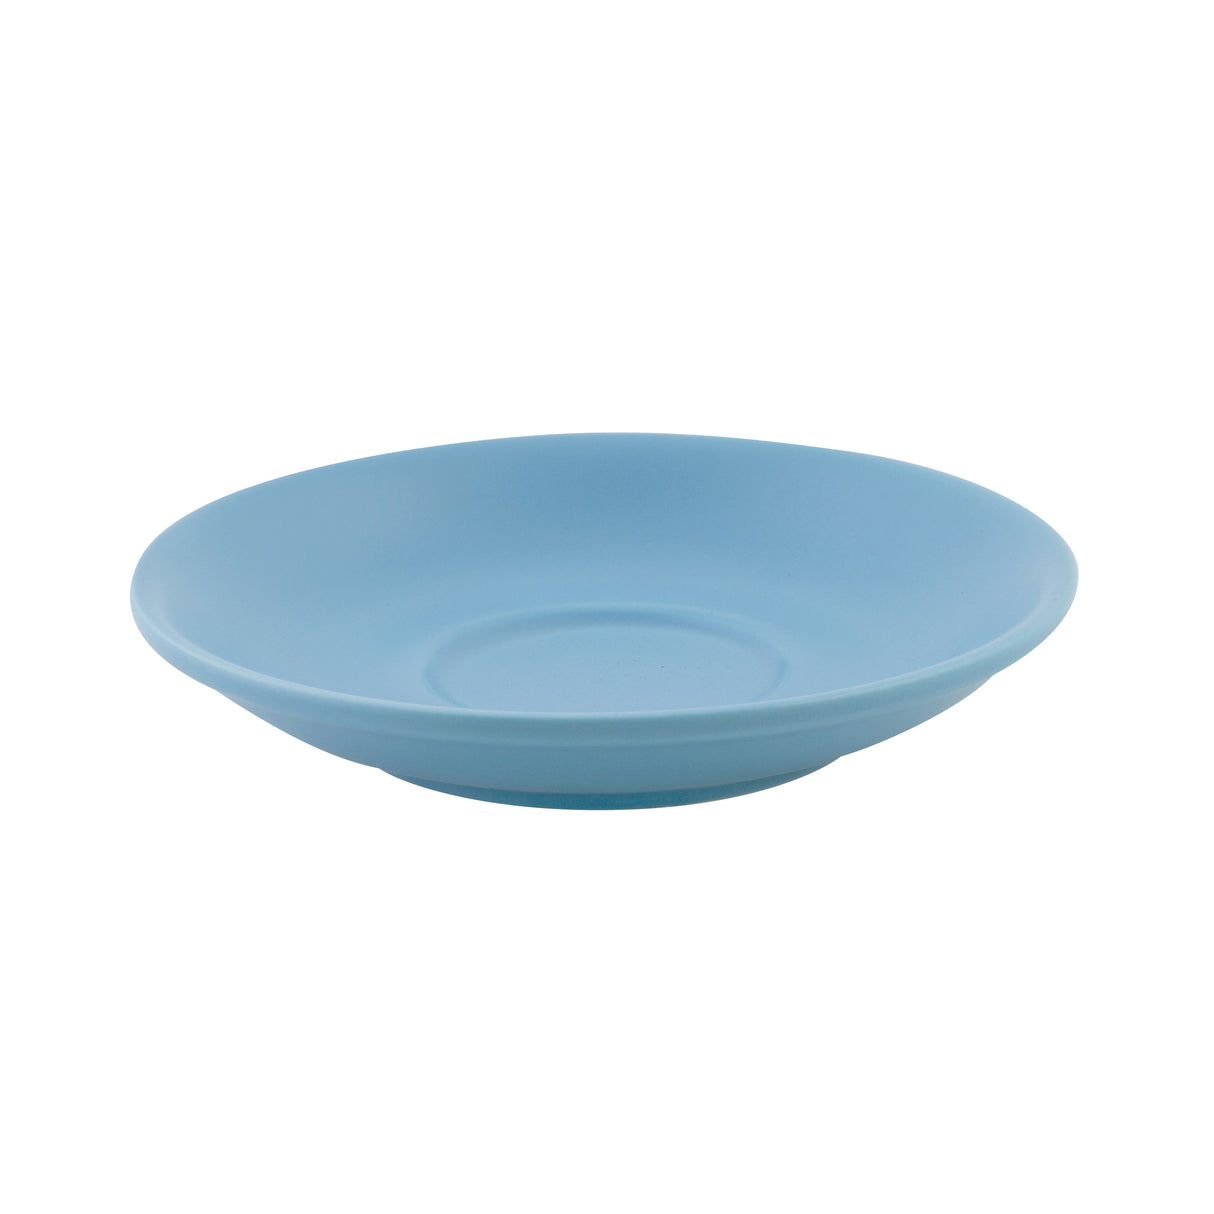 Saucer - Breeze, 140mm from Bevande. made out of Porcelain and sold in boxes of 6. Hospitality quality at wholesale price with The Flying Fork! 